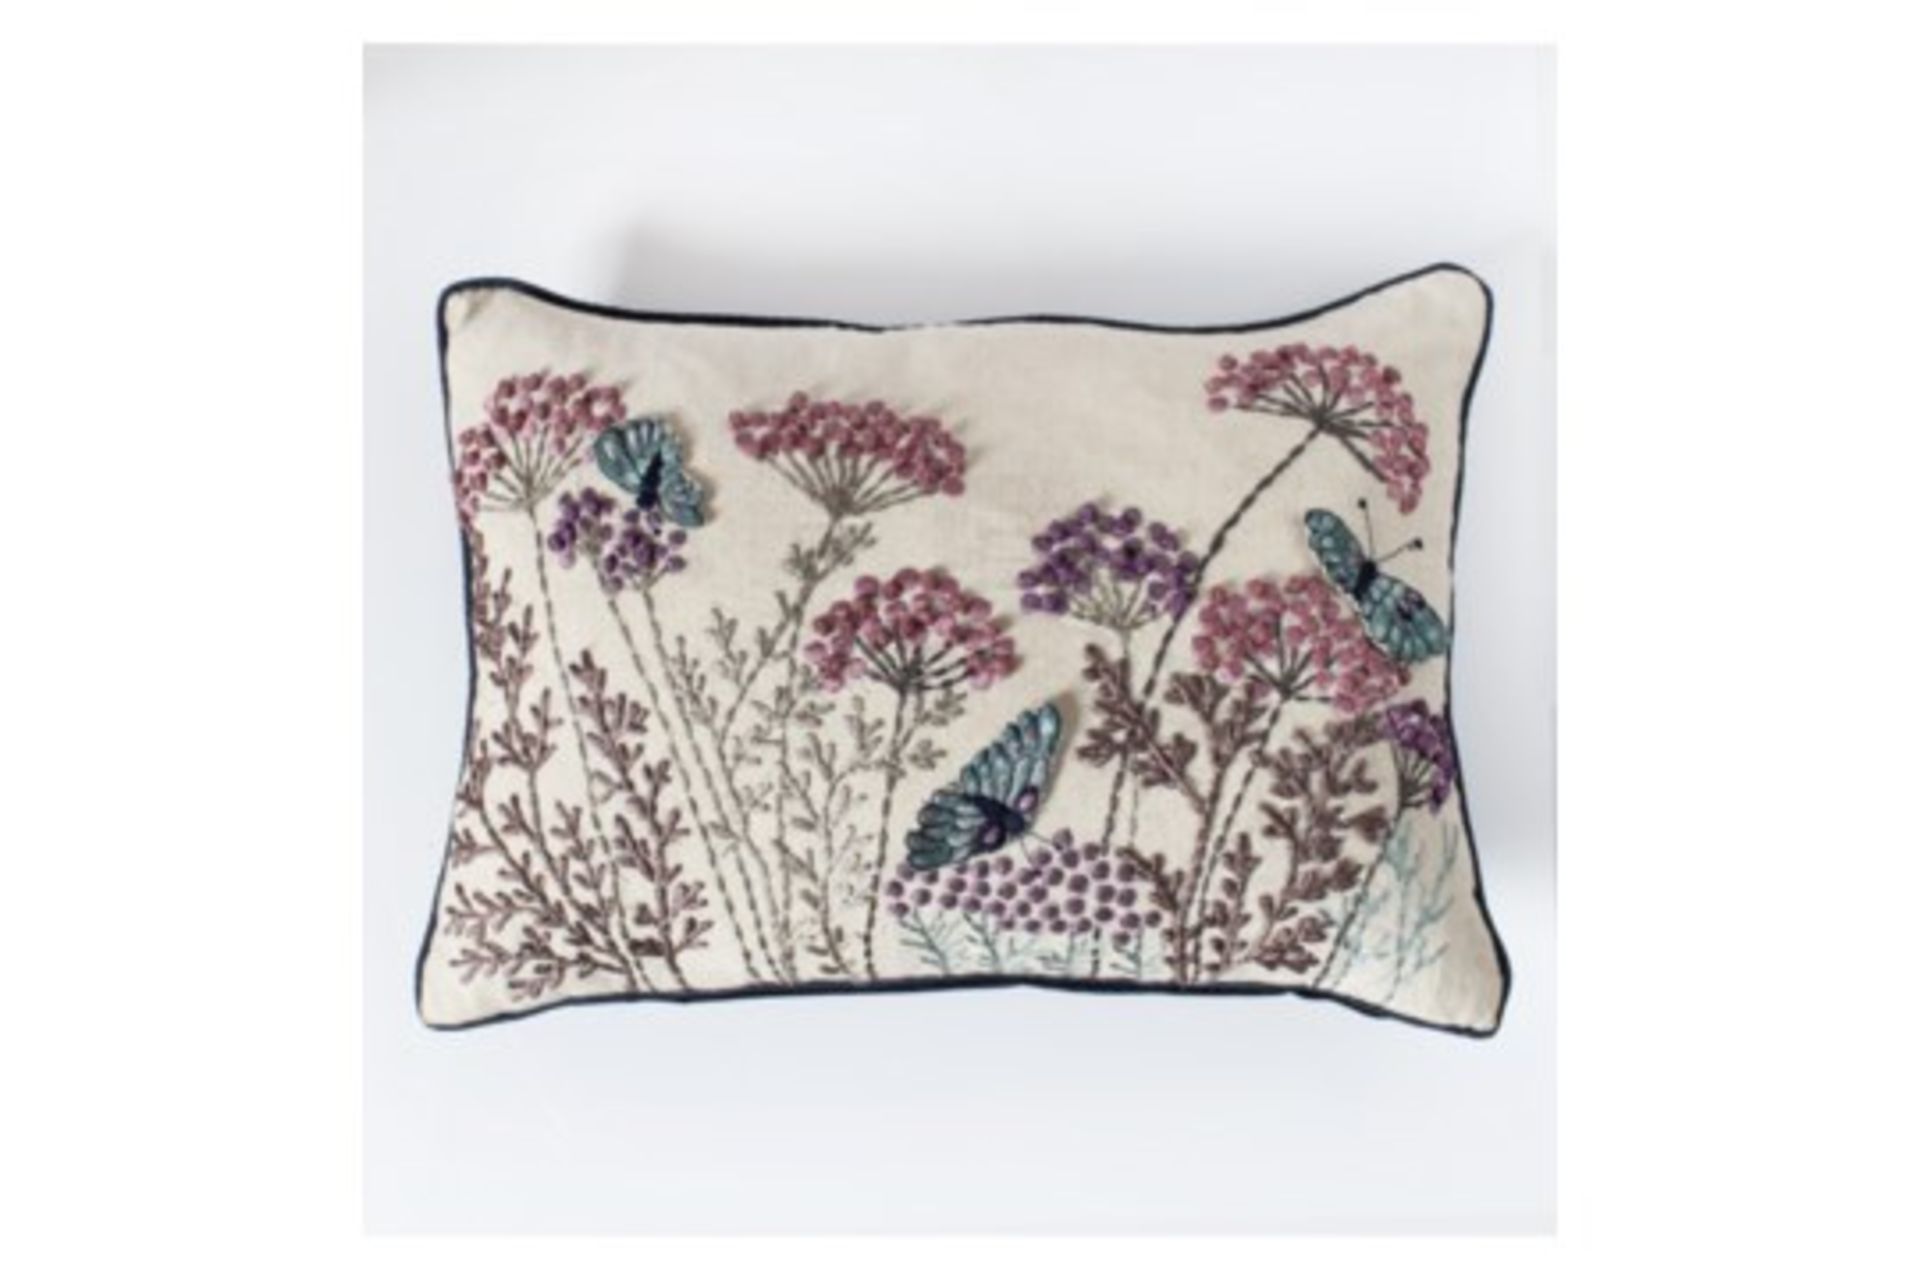 4 x Patterdale Embroidered Cushion Feather Filled Applique Design In A Beautiful Purple, Blush Pink,